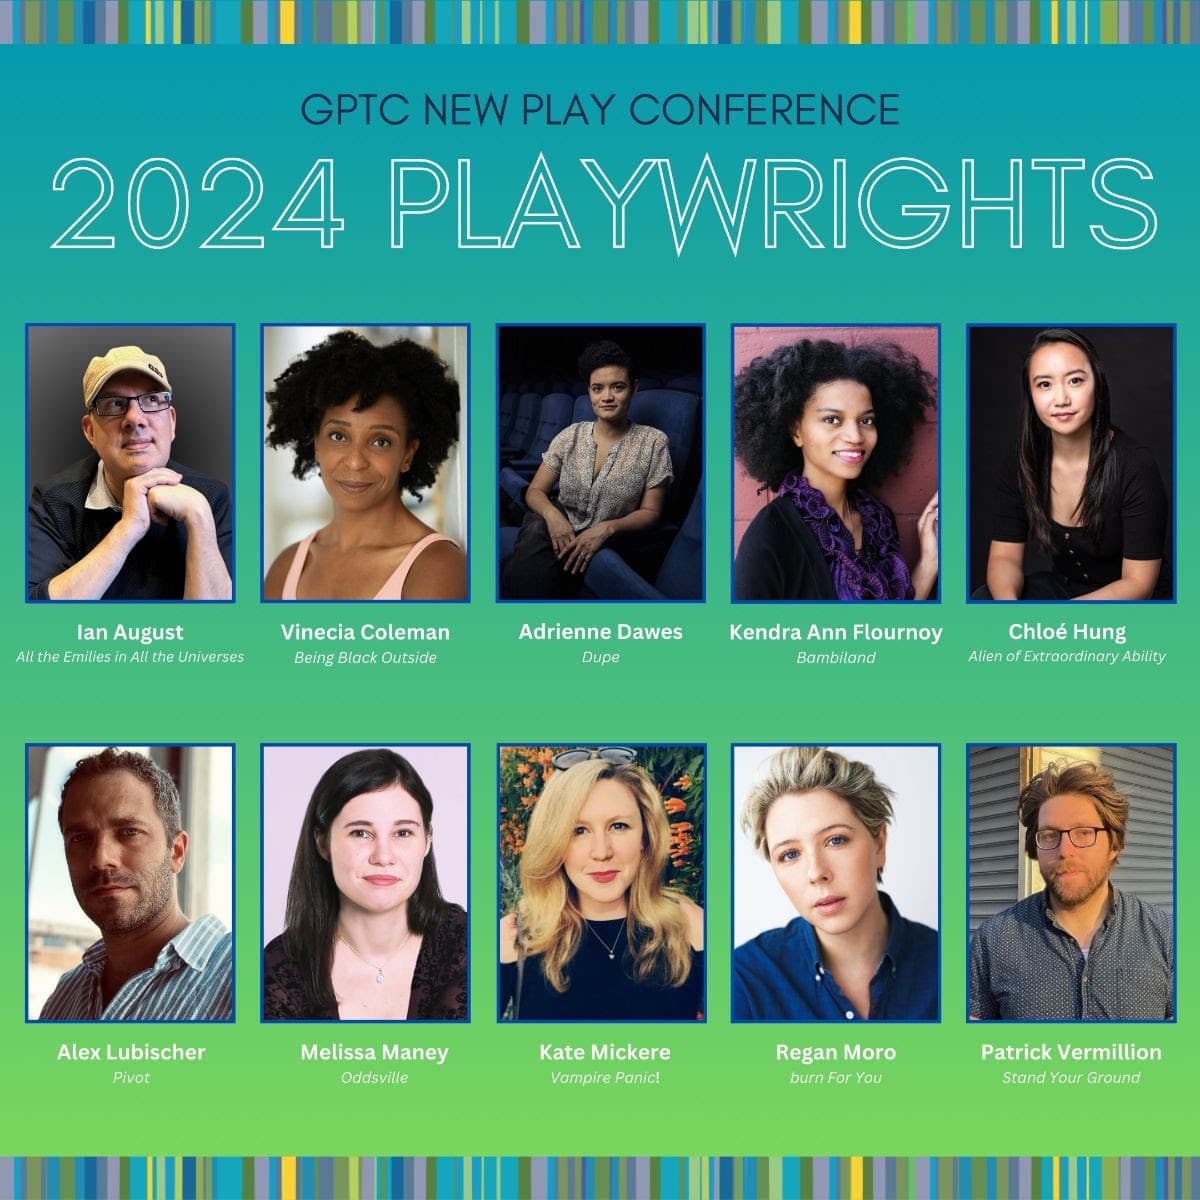 Composite image of the 10 playwrights in the 2024 New Play Conference